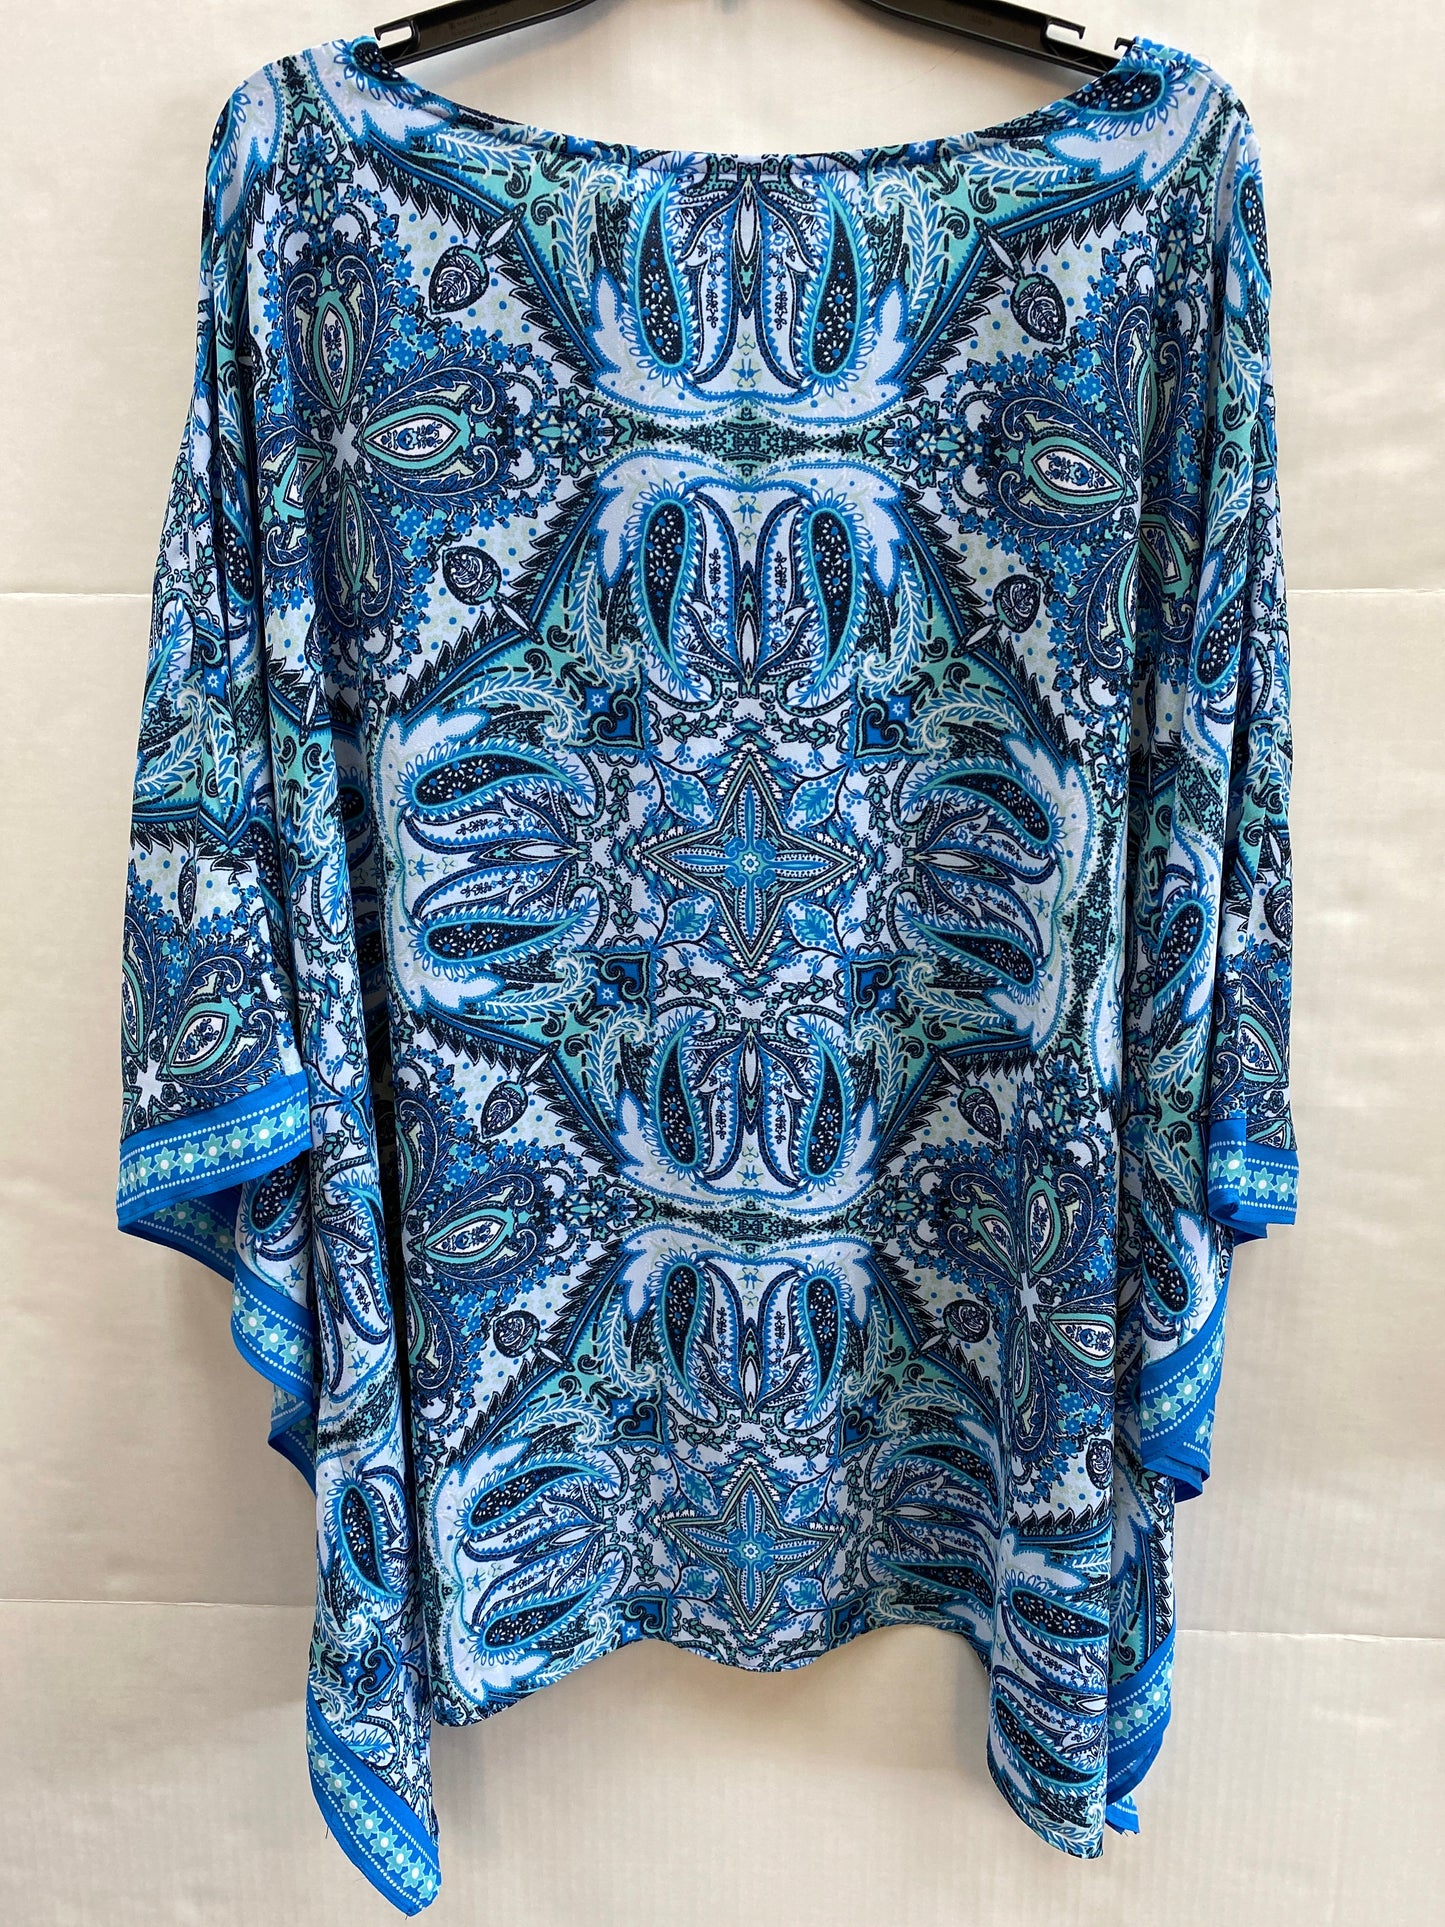 Blue Top 3/4 Sleeve Clothes Mentor, Size 3x